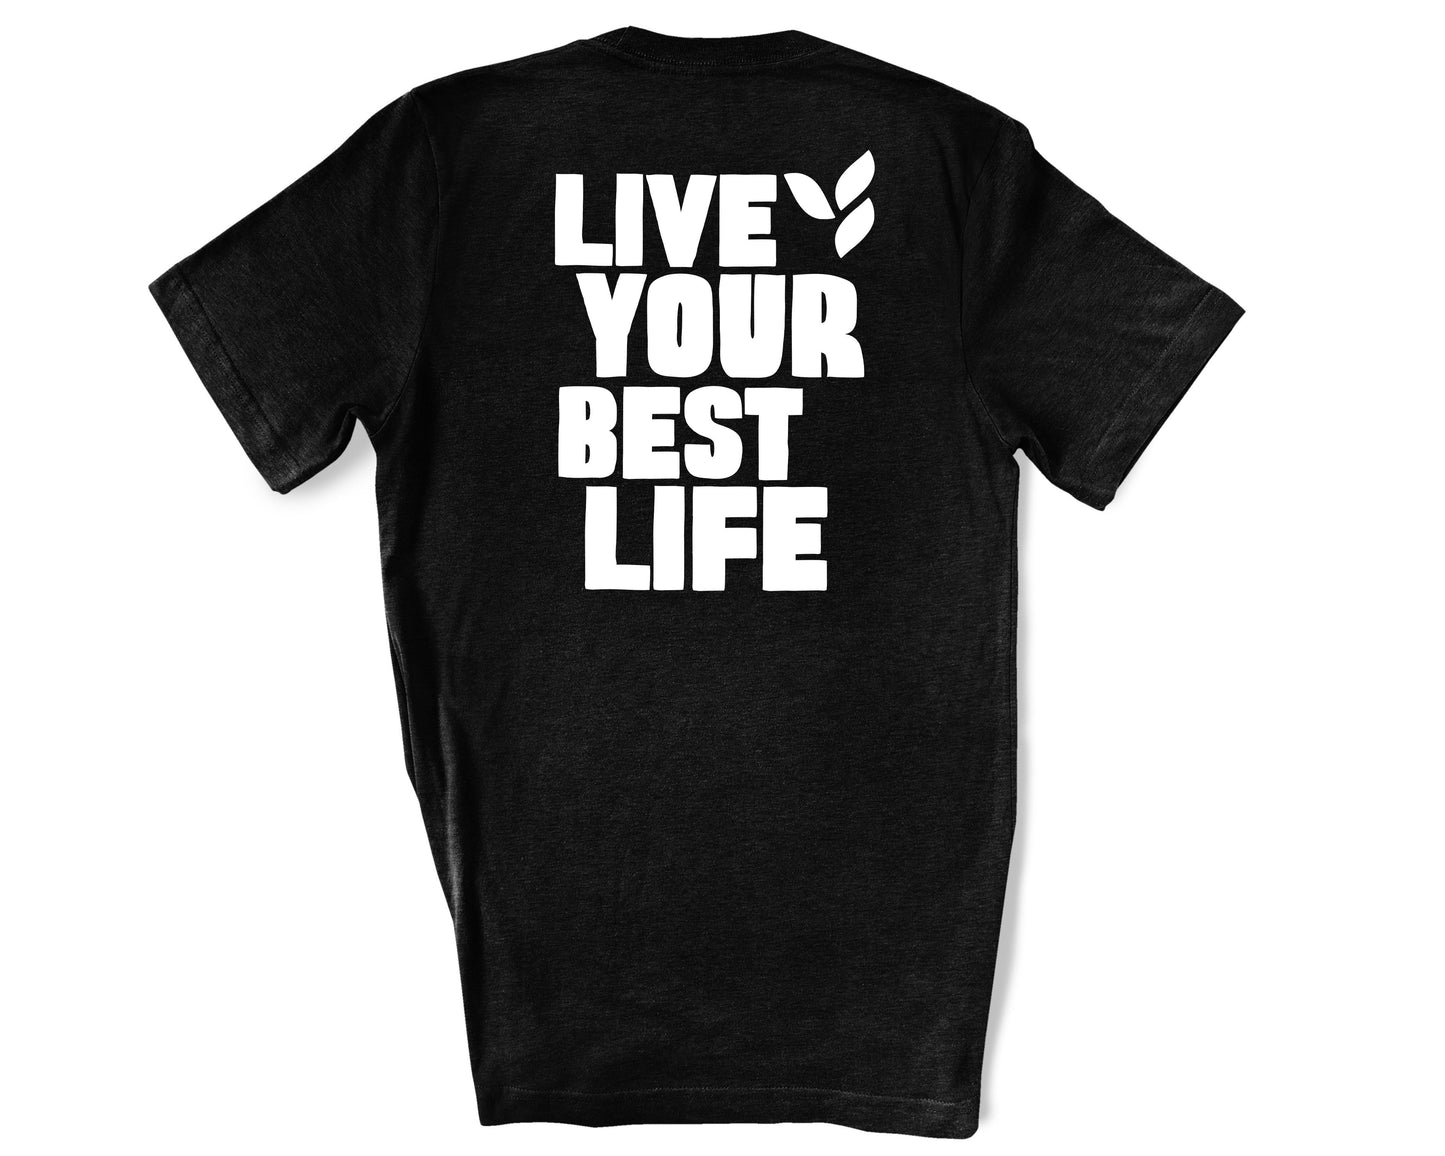 Live your best life T shirt!